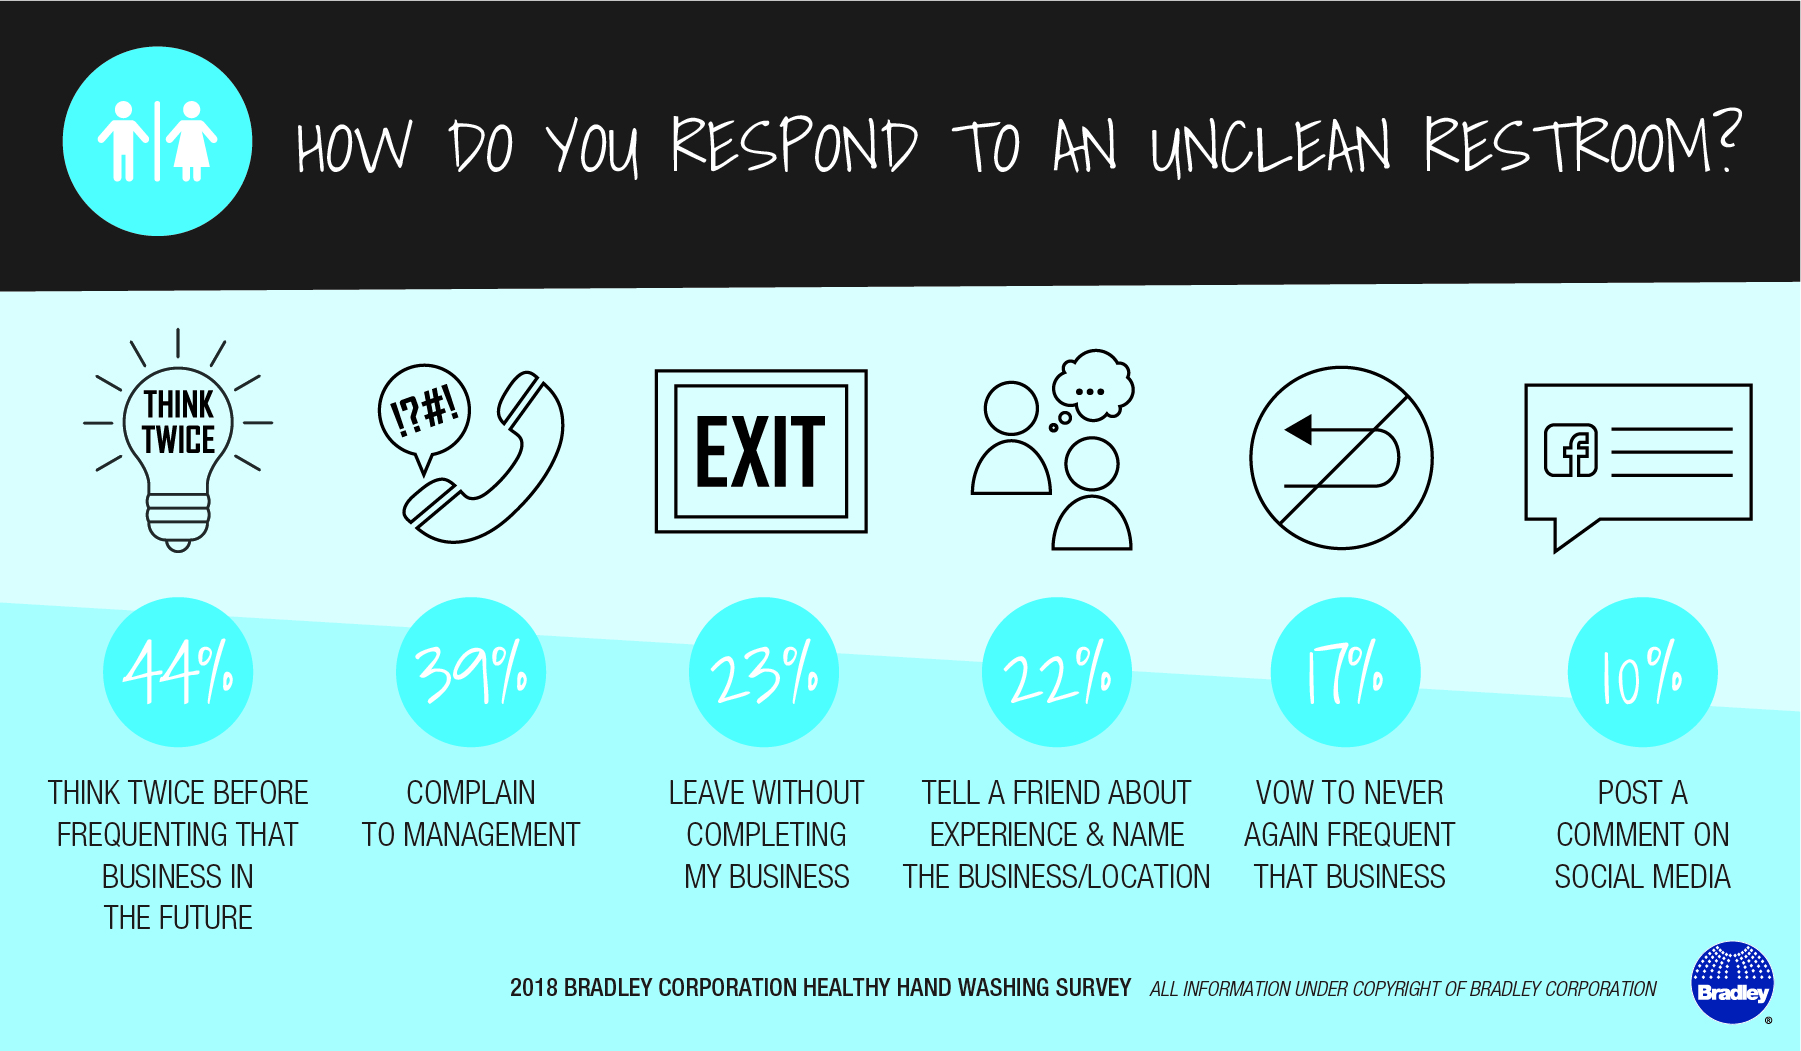 More than half of Americans are unlikely to return to a business after experiencing a bad restroom.